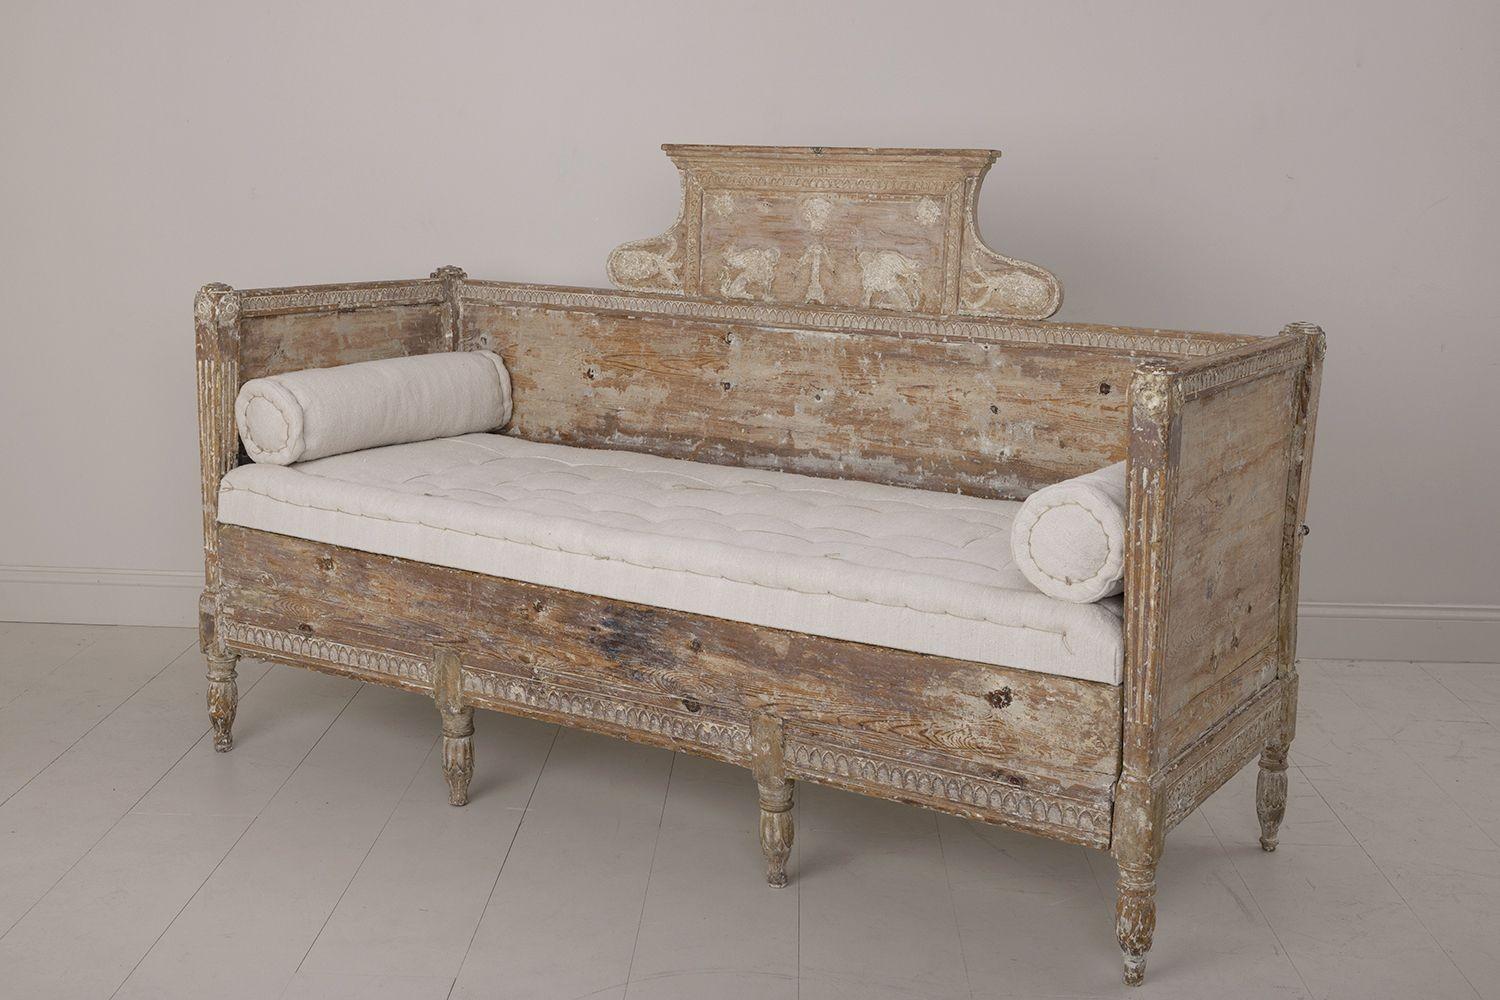 An exceptionally rare, hand-carved Swedish Gustavian period sofa or daybed, circa 1790, hand-scraped to reveal the original paint surface and newly upholstered in antique linen with a hand-stitched tufted seat and side bolster pillows. Beautiful